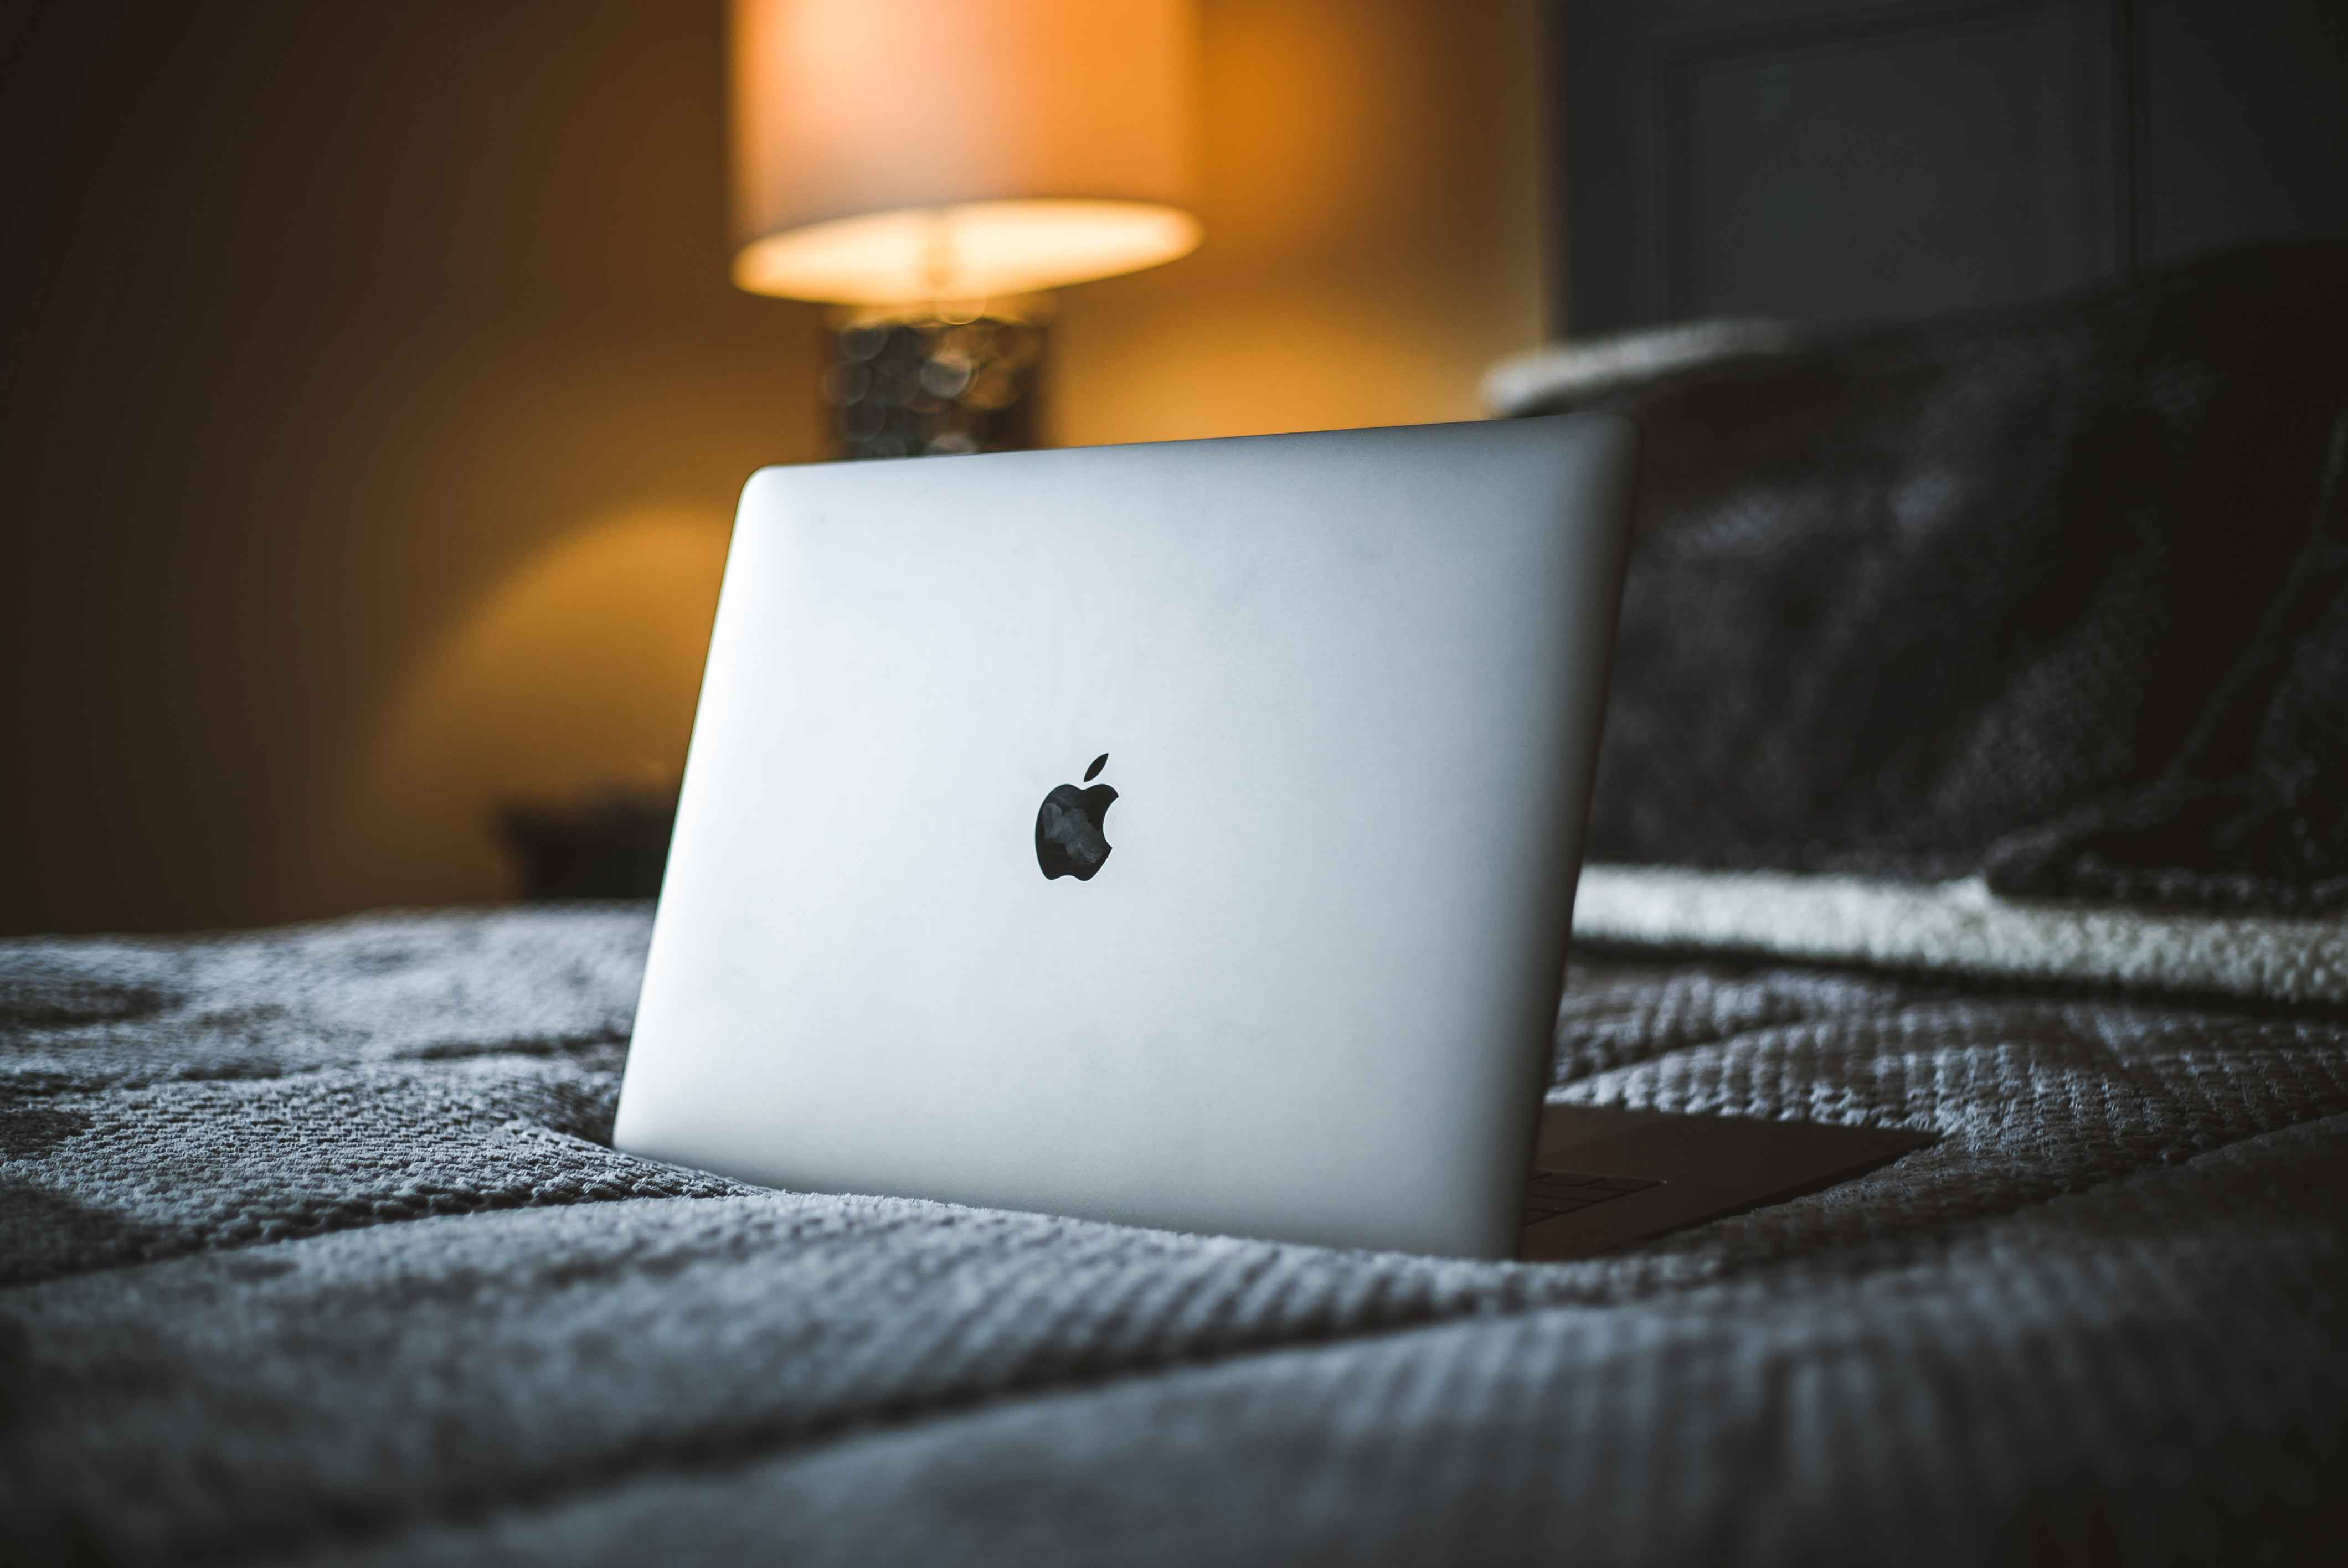 Troubleshooting Guide: Why Your Macbook Battery Won’t Charge and How to Fix It